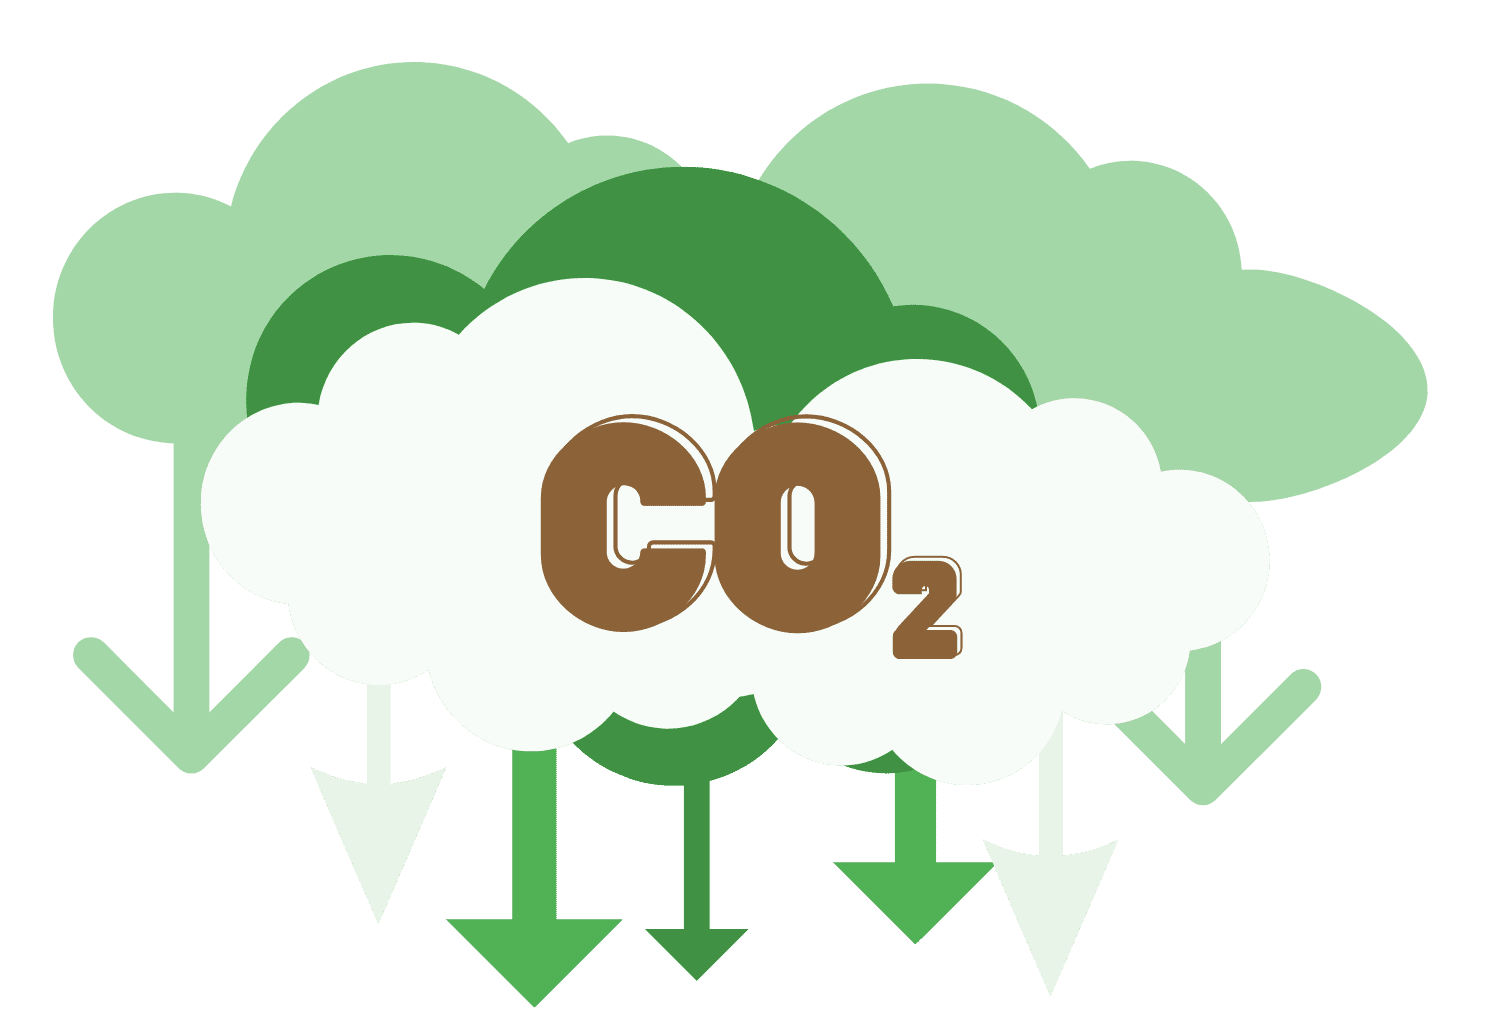 CO2.png_1674865820